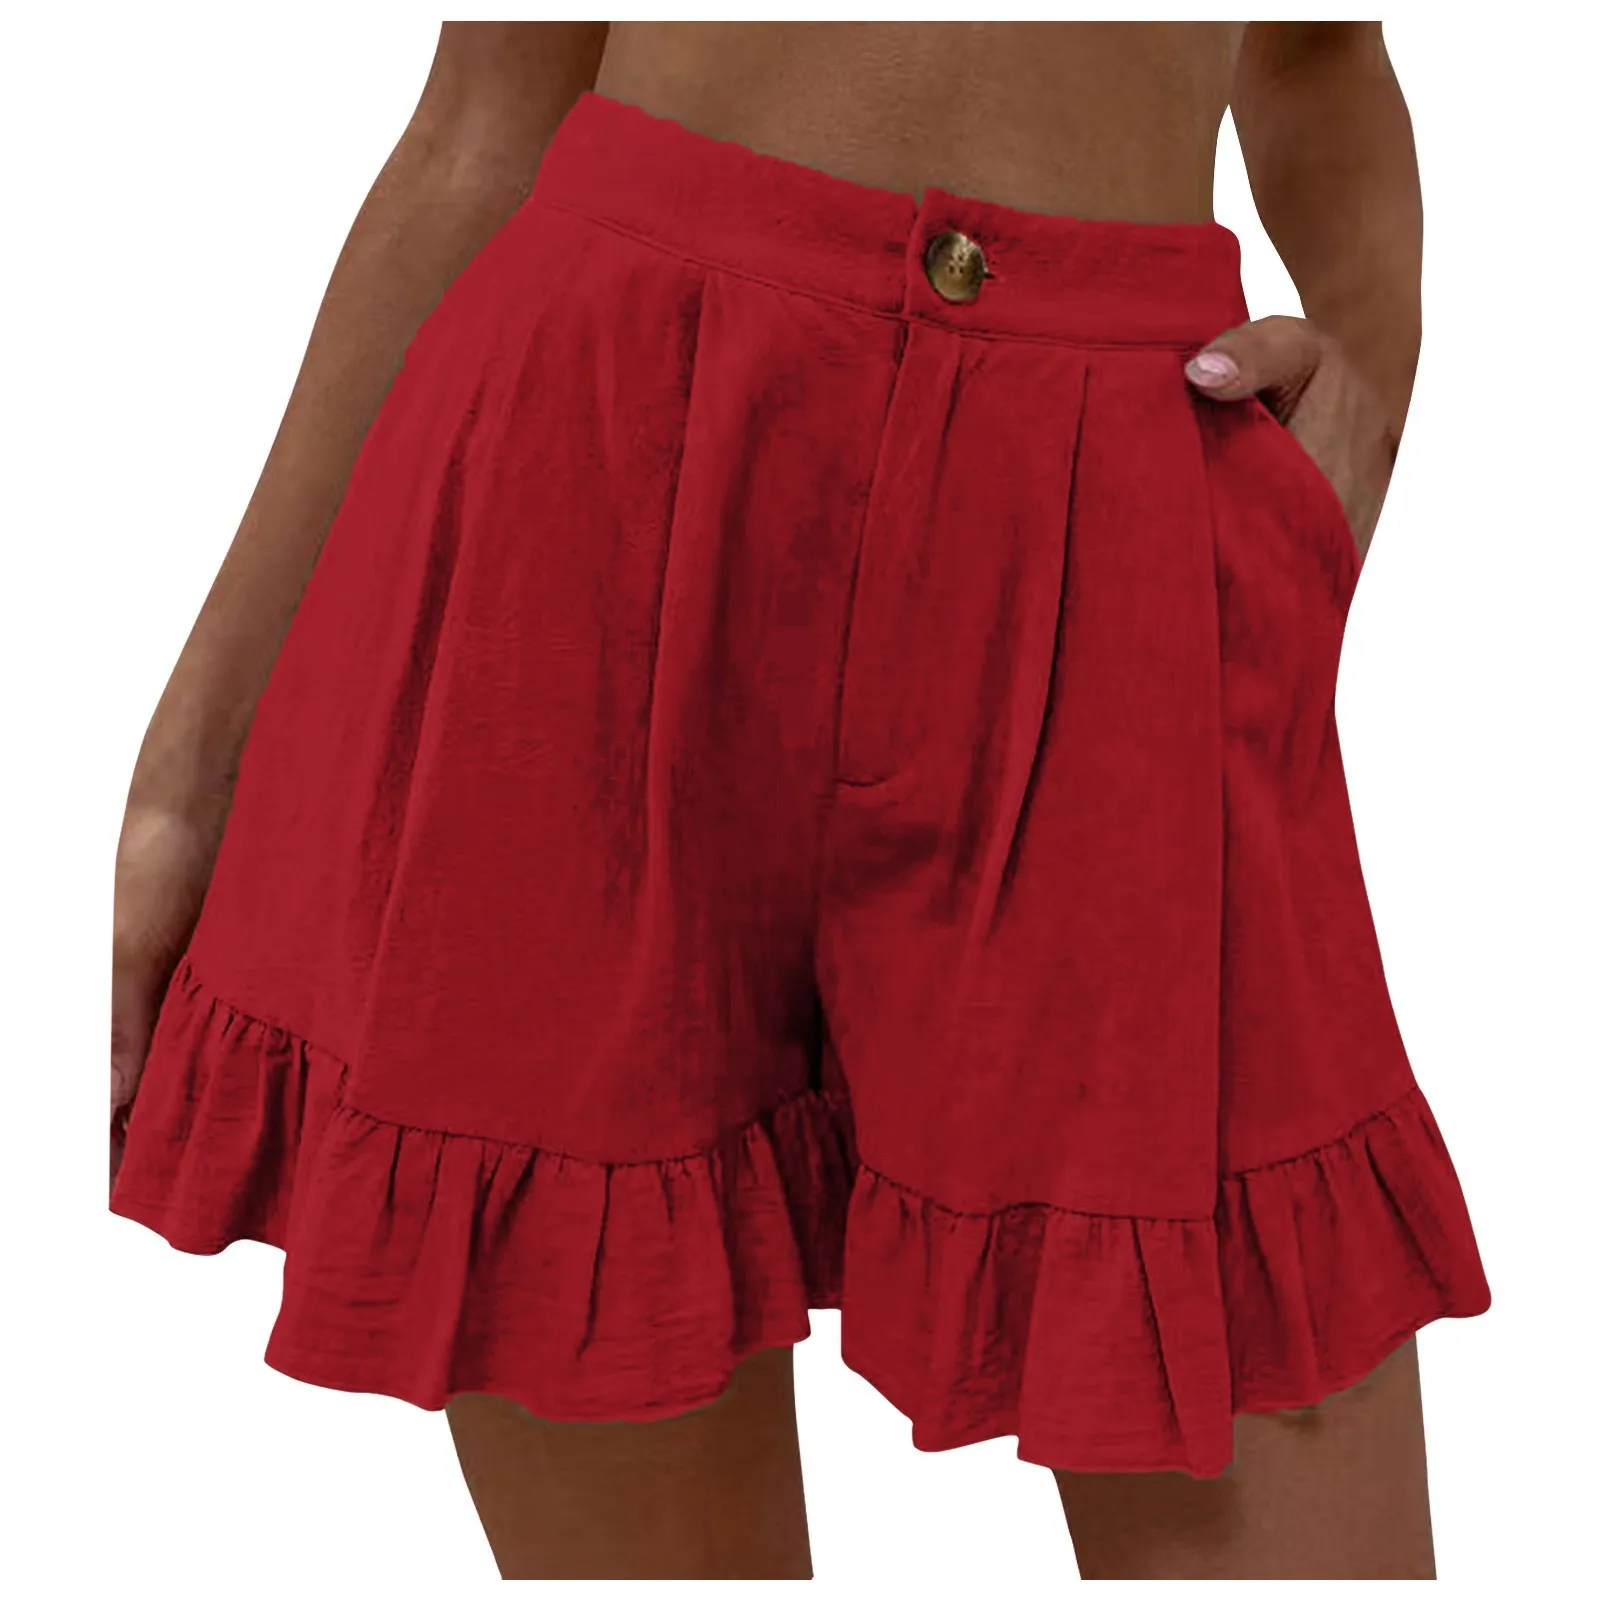 

Summer Women's Shorts Loose Fitting Wide Leg Shorts With A Line Ruffle Trim Cotton Linen Texture For Casual Soft Wear